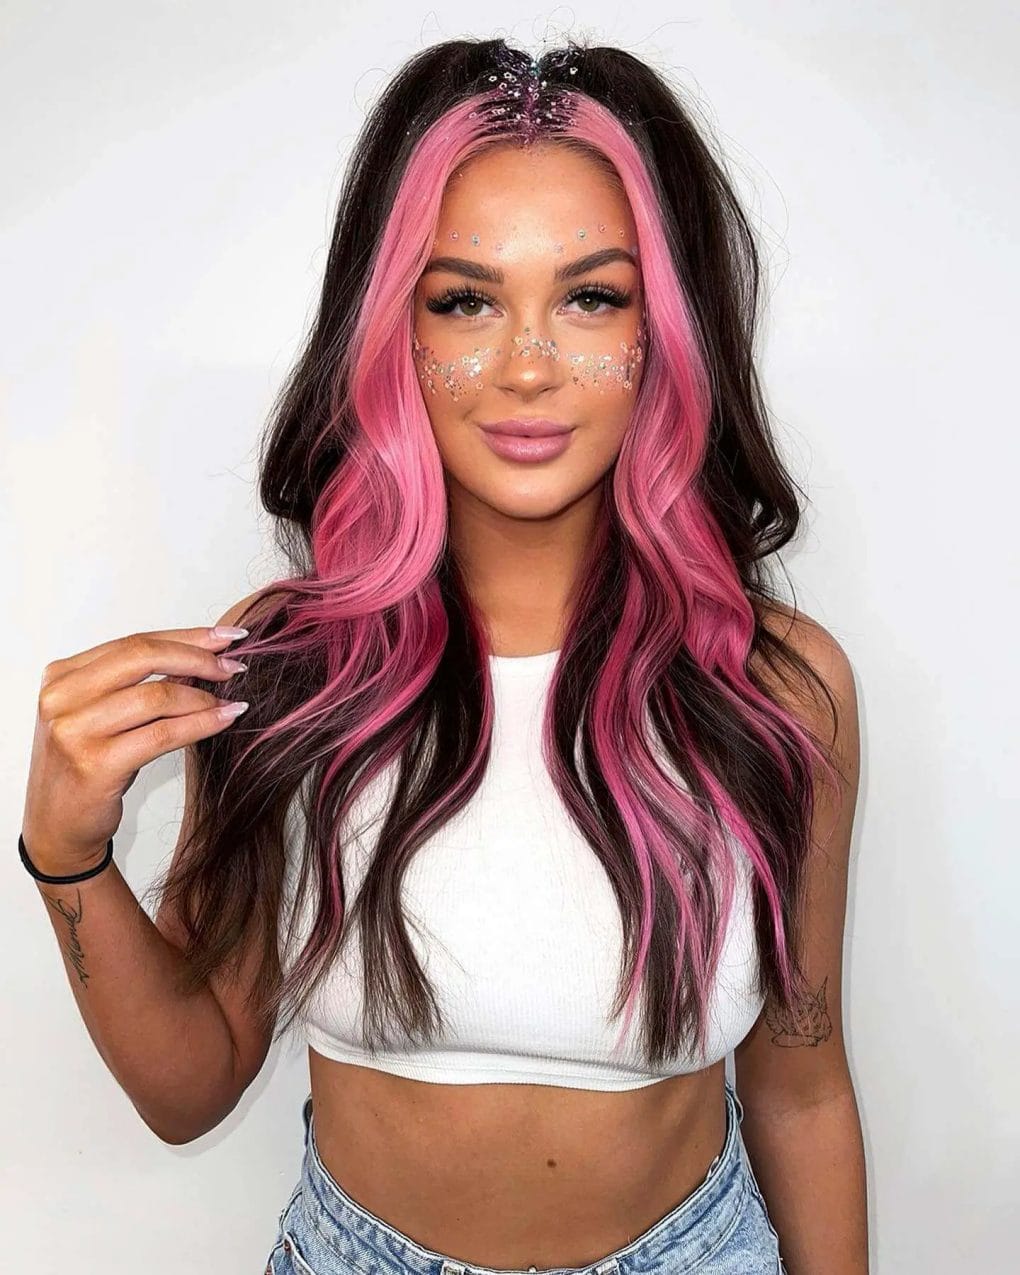 Bold pink balayage with soft waves and face gemstones, embodying festival sunset vibes.